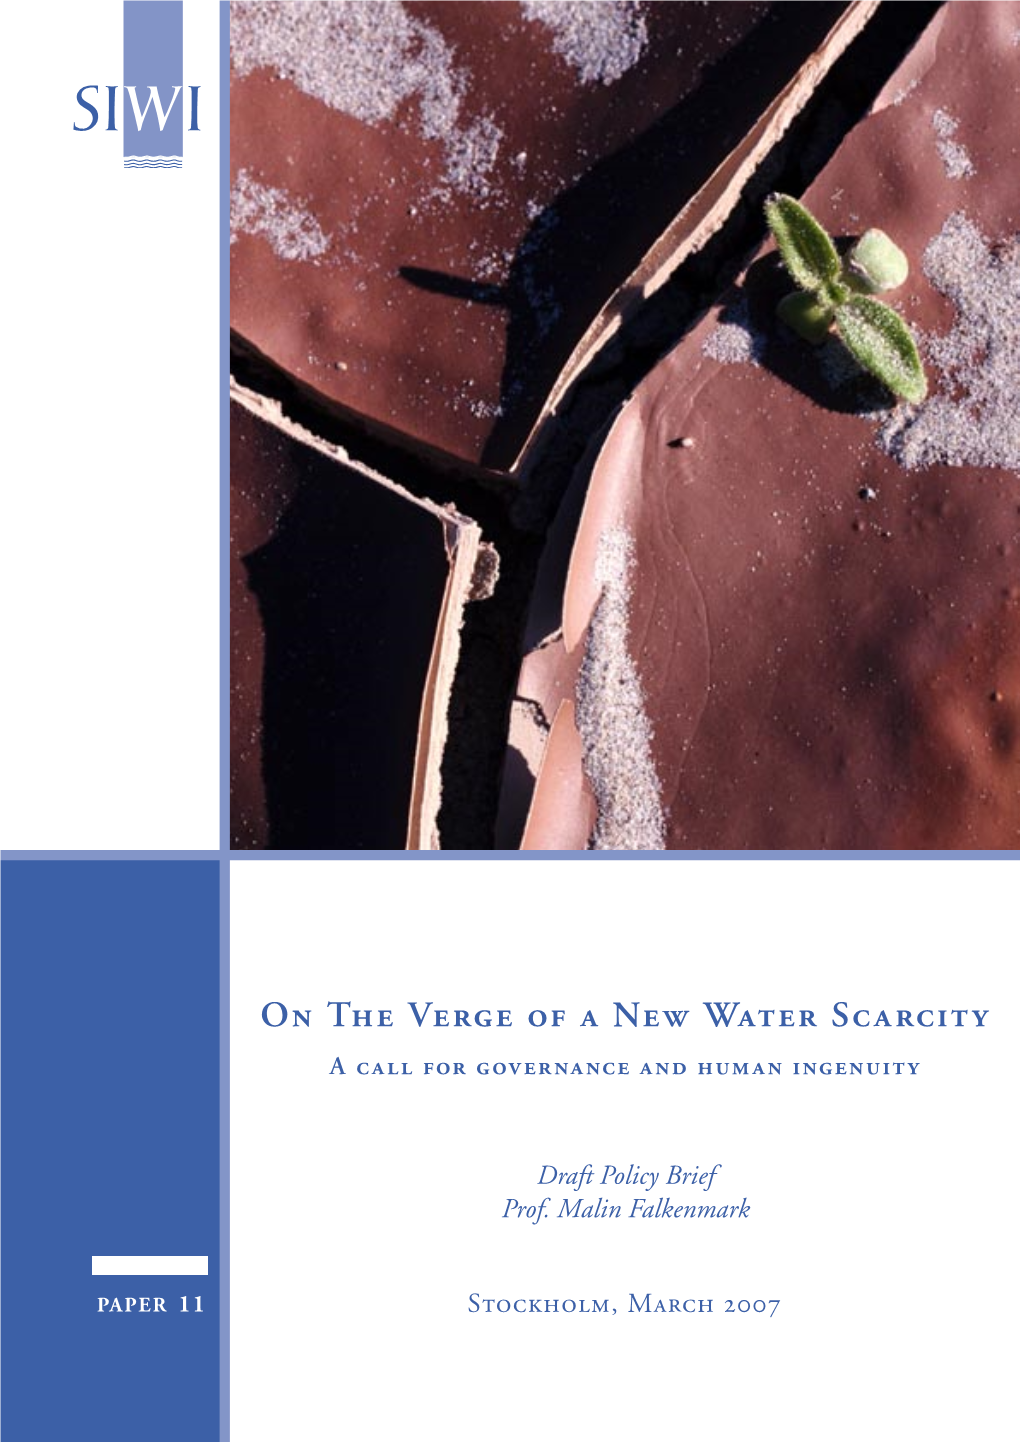 On the Verge of a New Water Scarcity a Call for Governance and Human Ingenuity